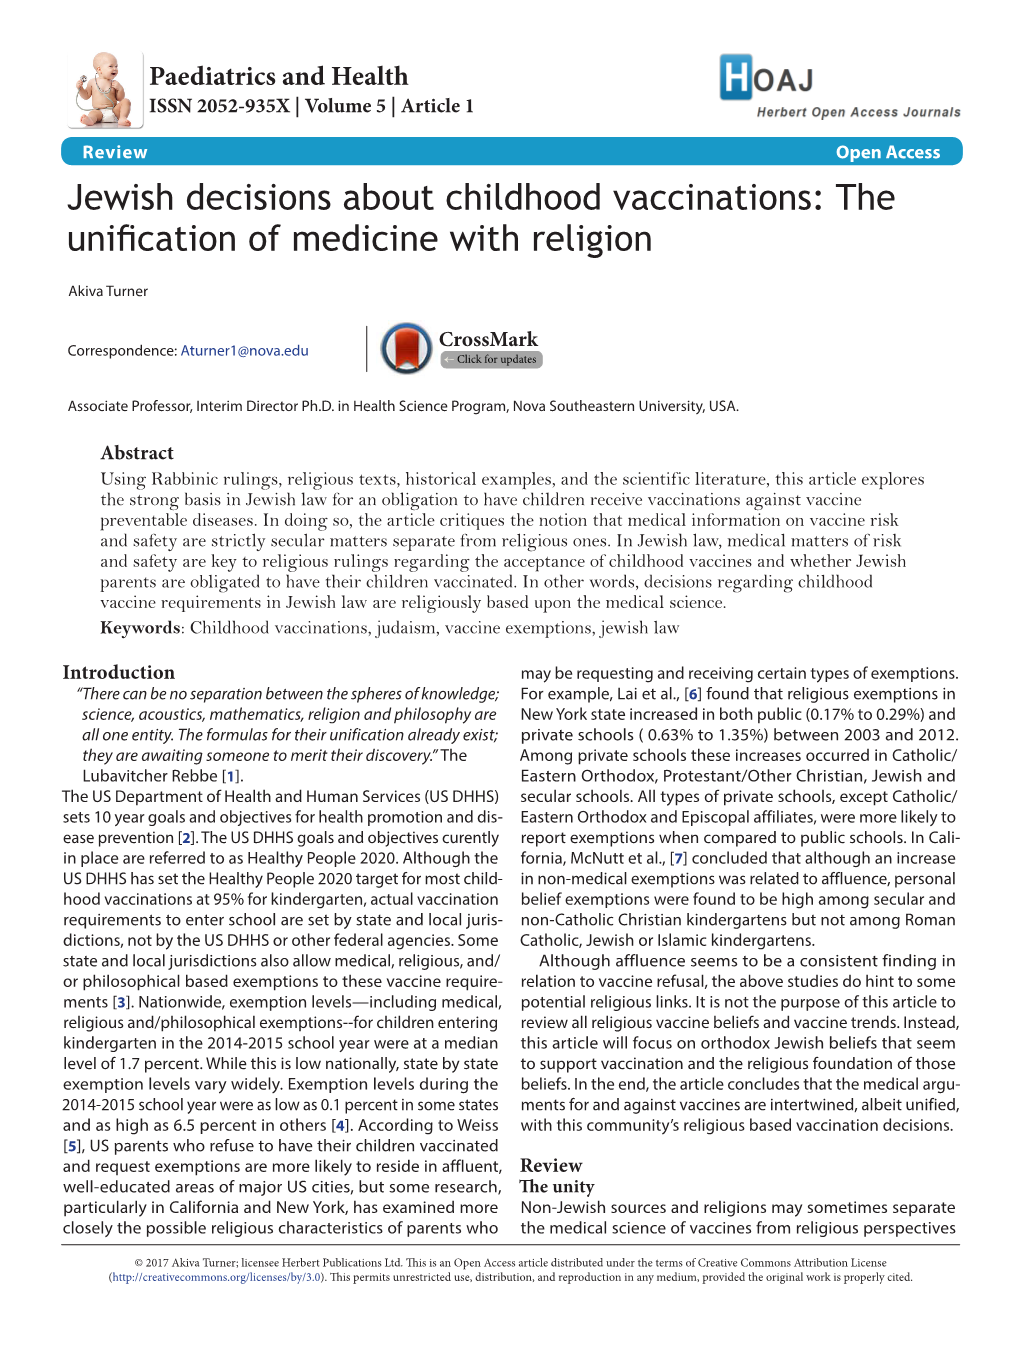 Jewish Decisions About Childhood Vaccinations: the Unification of Medicine with Religion